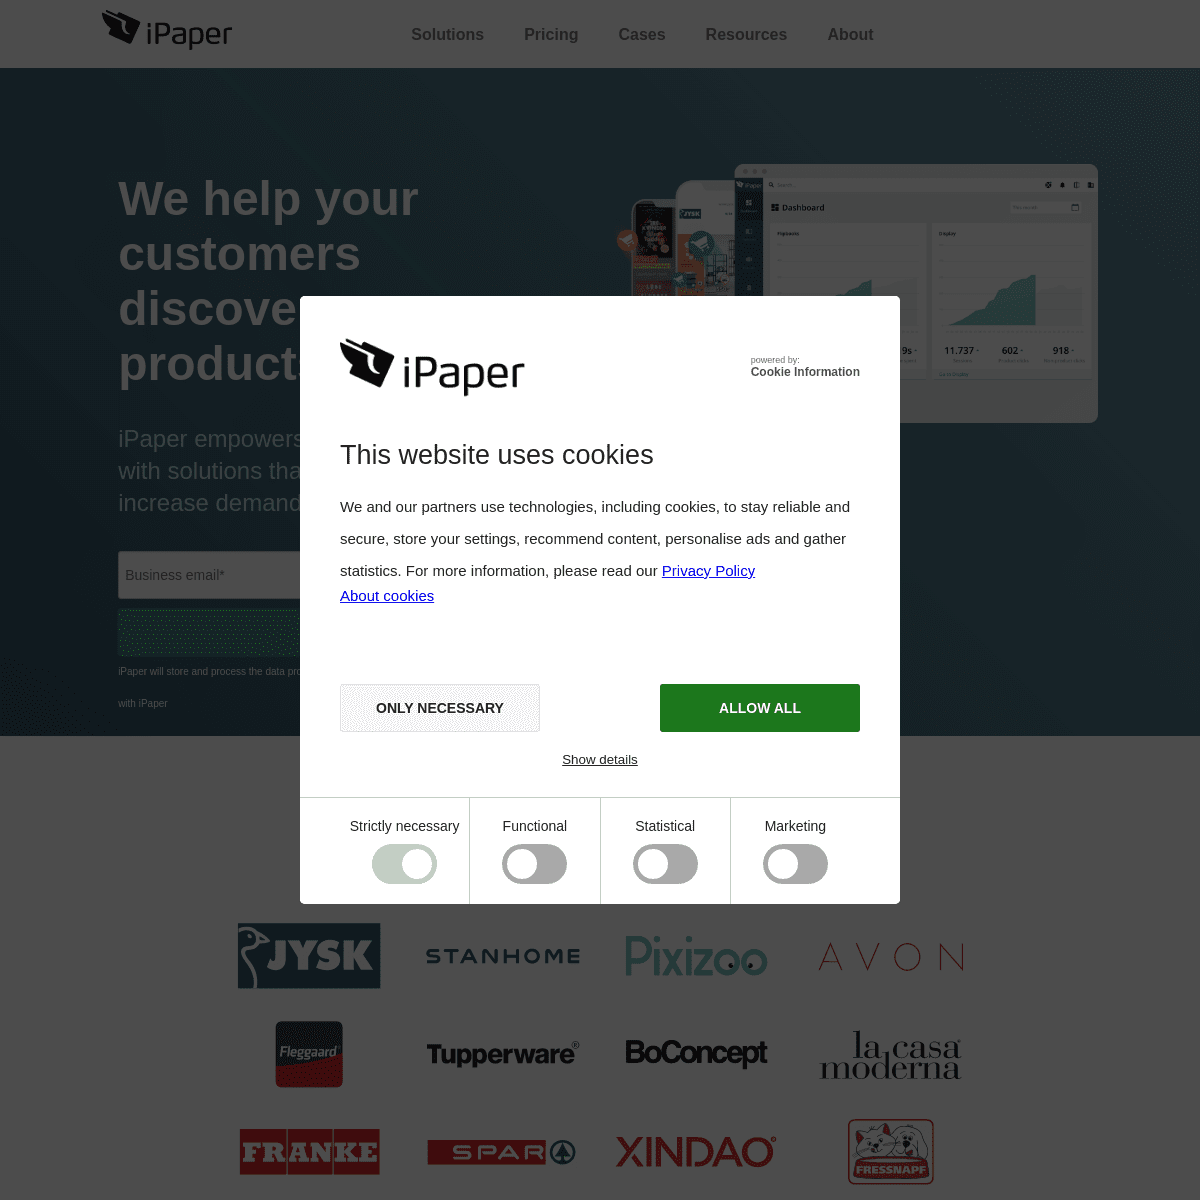 A complete backup of ipaper.io